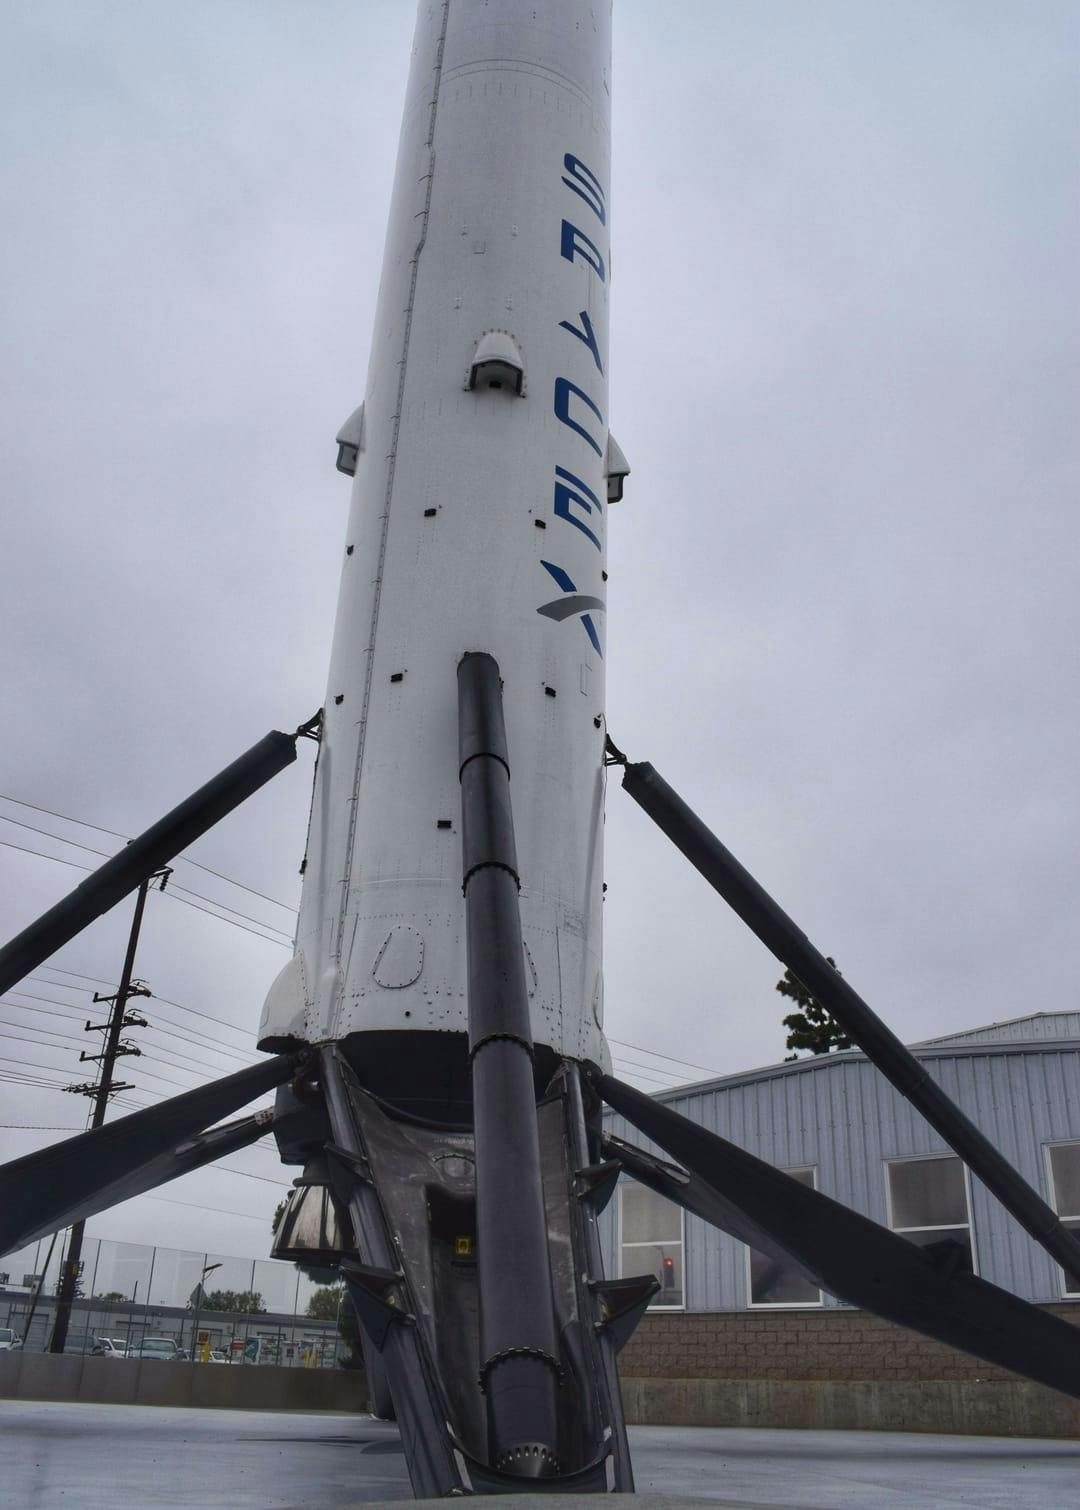 The first orbital rocket to launch into space and then land safely back on Earth. SpaceX headquarters, Hawthorne, CA